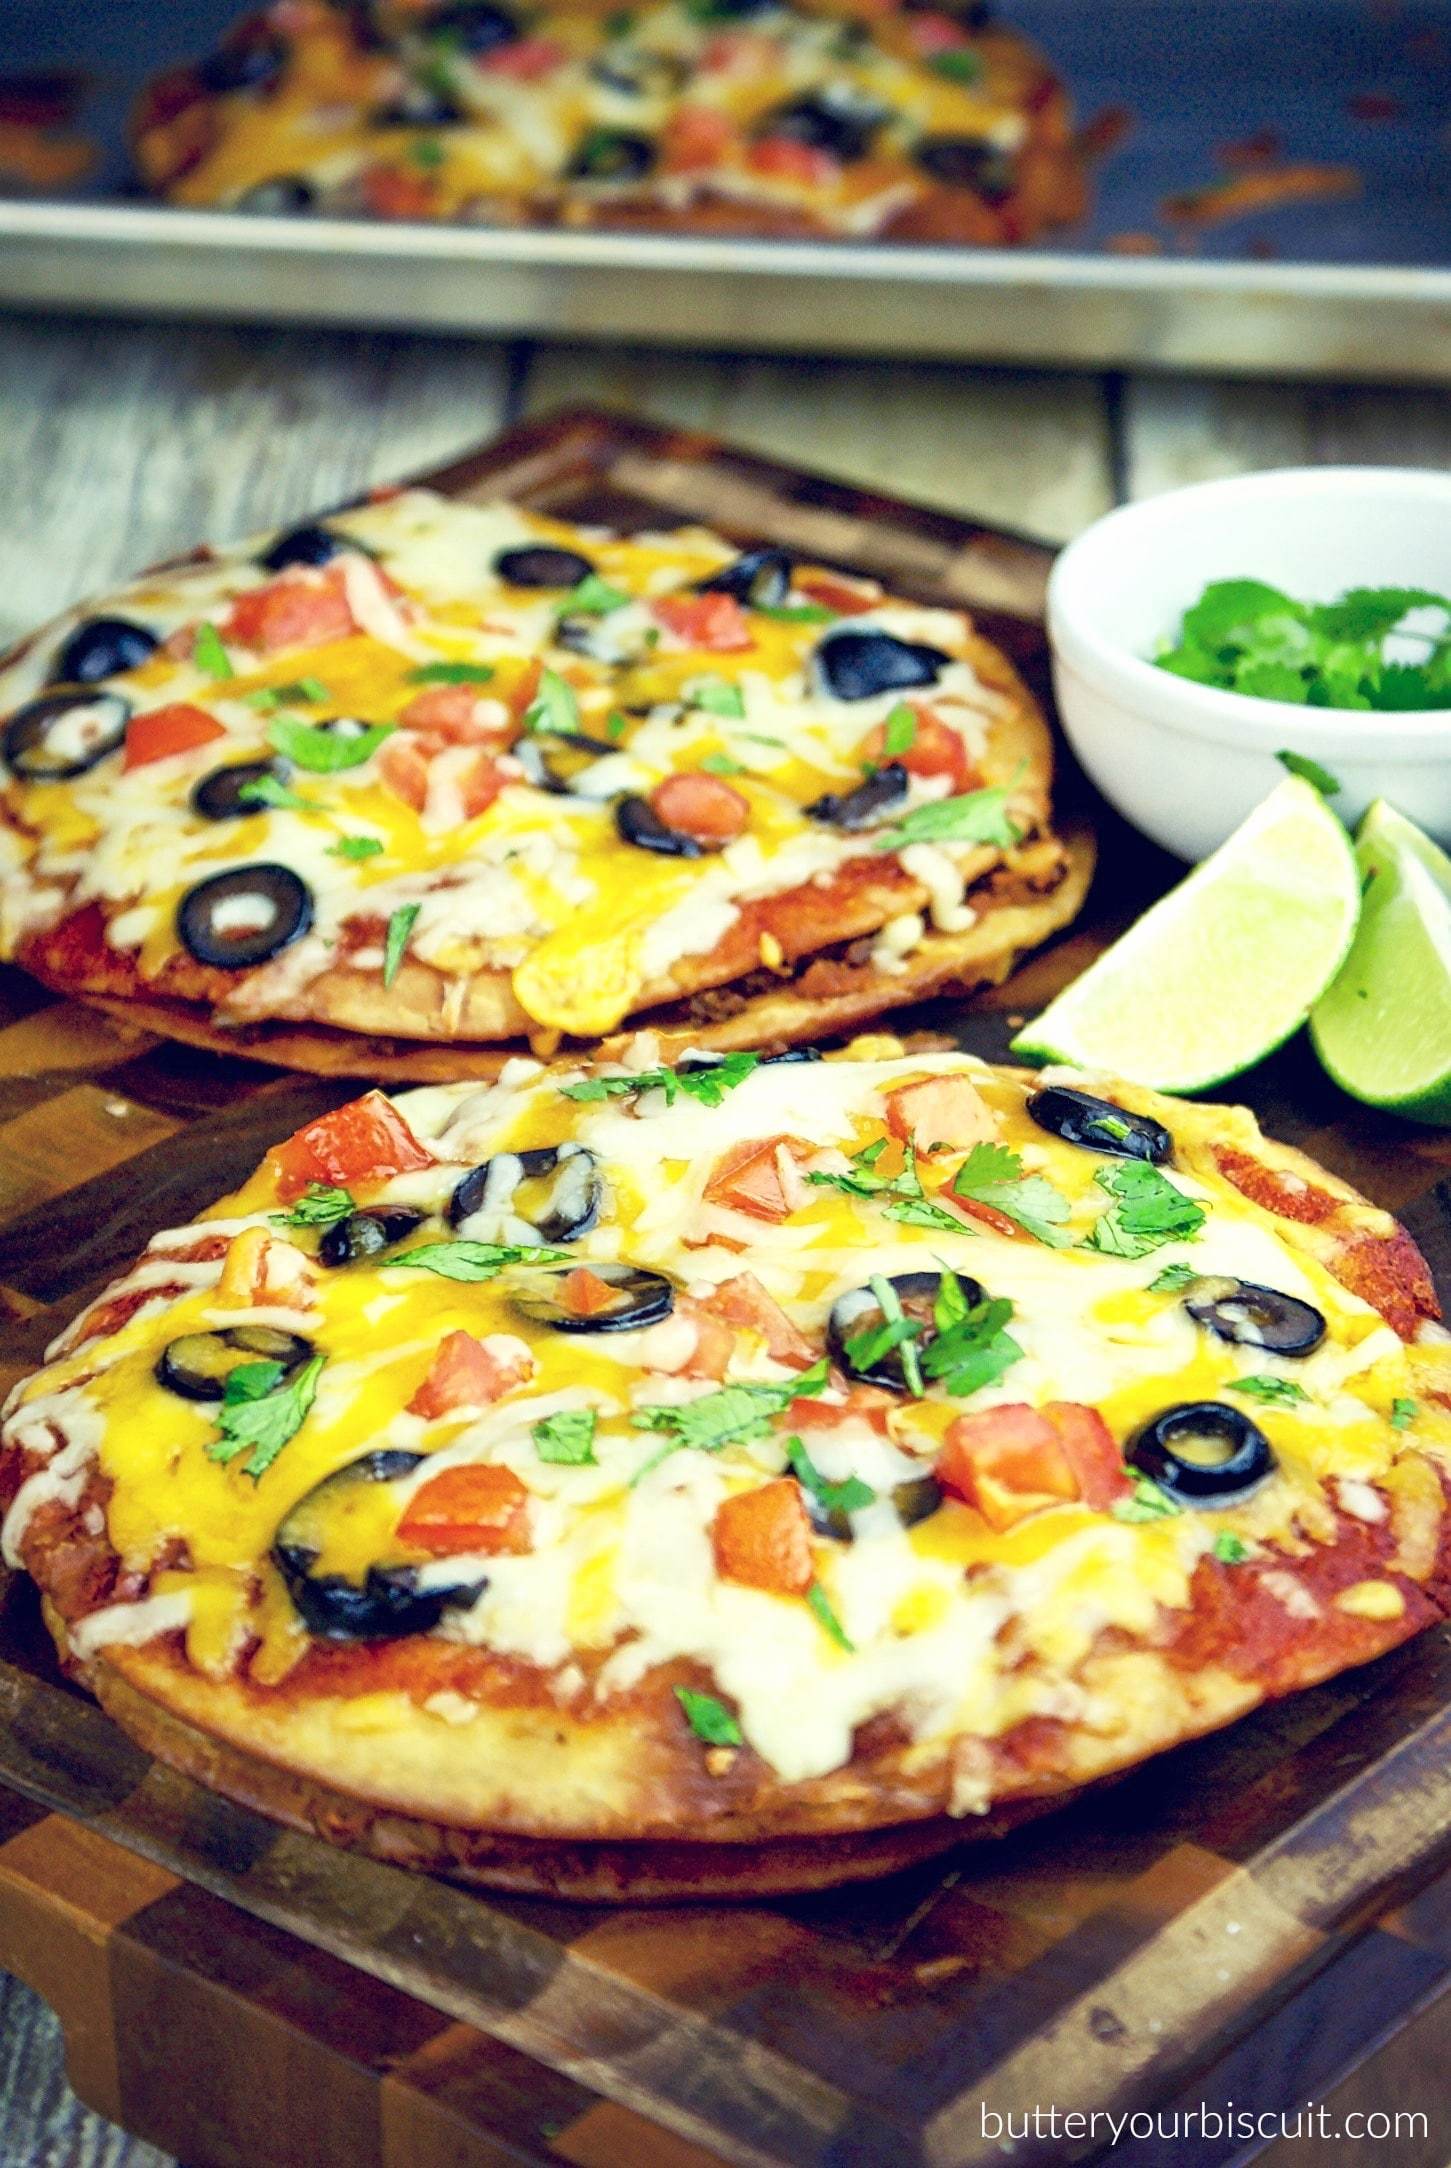 Best Pizza Recipes - Easy Mexican Pizza - Homemade Pizza Recipe Ideas for Healthy, Easy Dinner, Lunch and Snacks - How To Make Pizza Dough at Home - Step by Step Tutorials for Varieties with Pepperoni, Gourmet and Unique Tips With Pillsbury Biscuits, for Kids, With Chicken and French Bread - Thin Crust and Deep Dish Pizzas #pizza #recipes